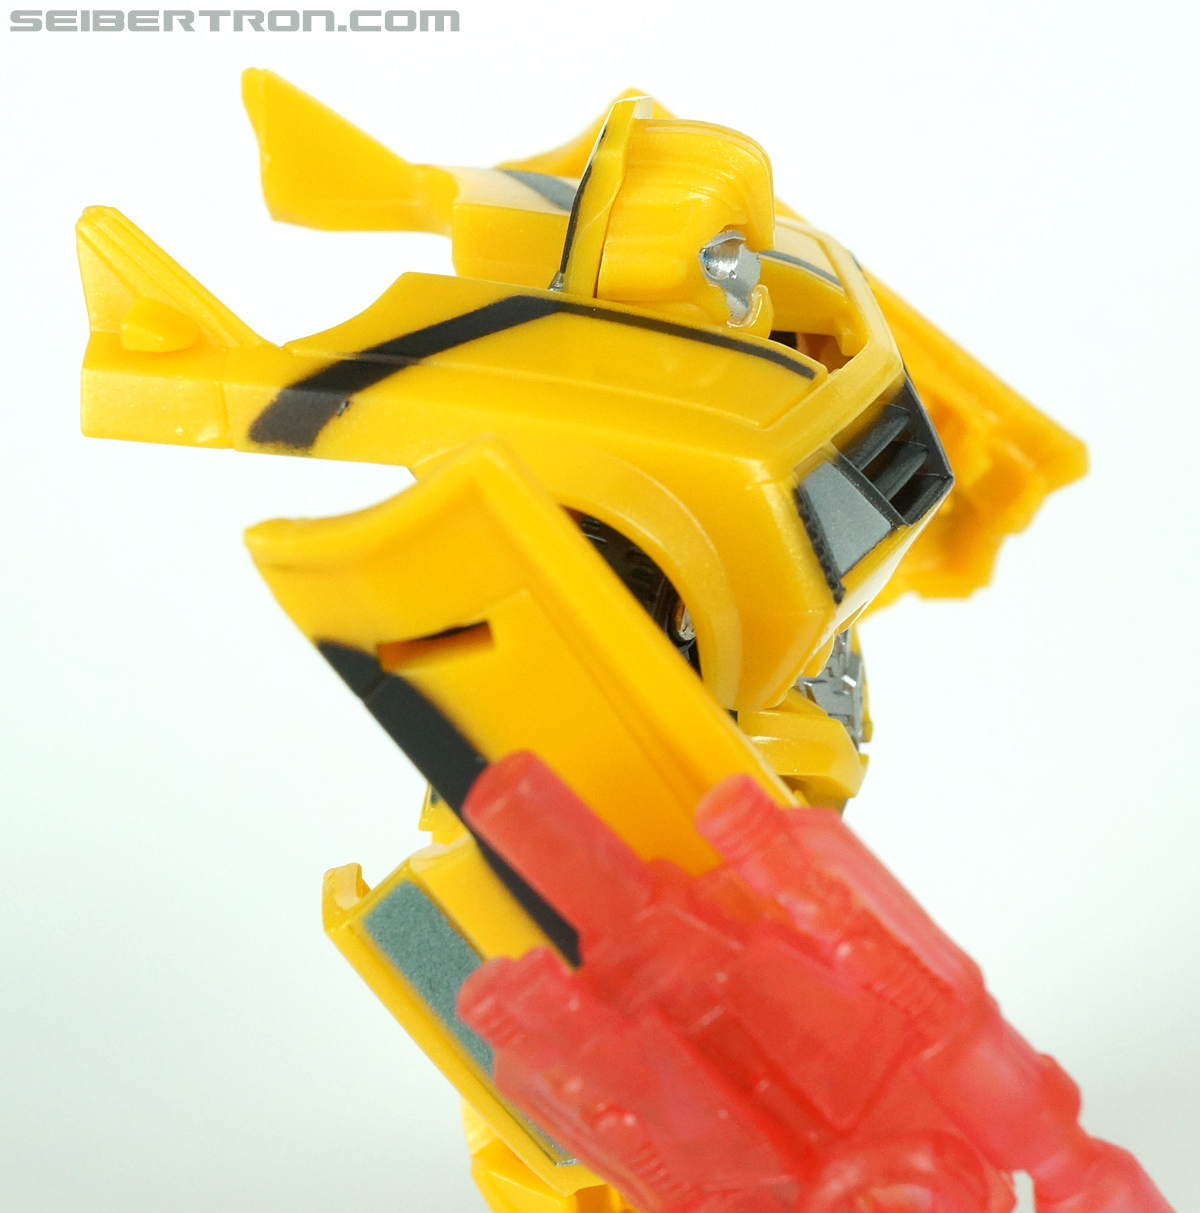 Transformers Prime: Cyberverse Bumblebee (Image #64 of 110)